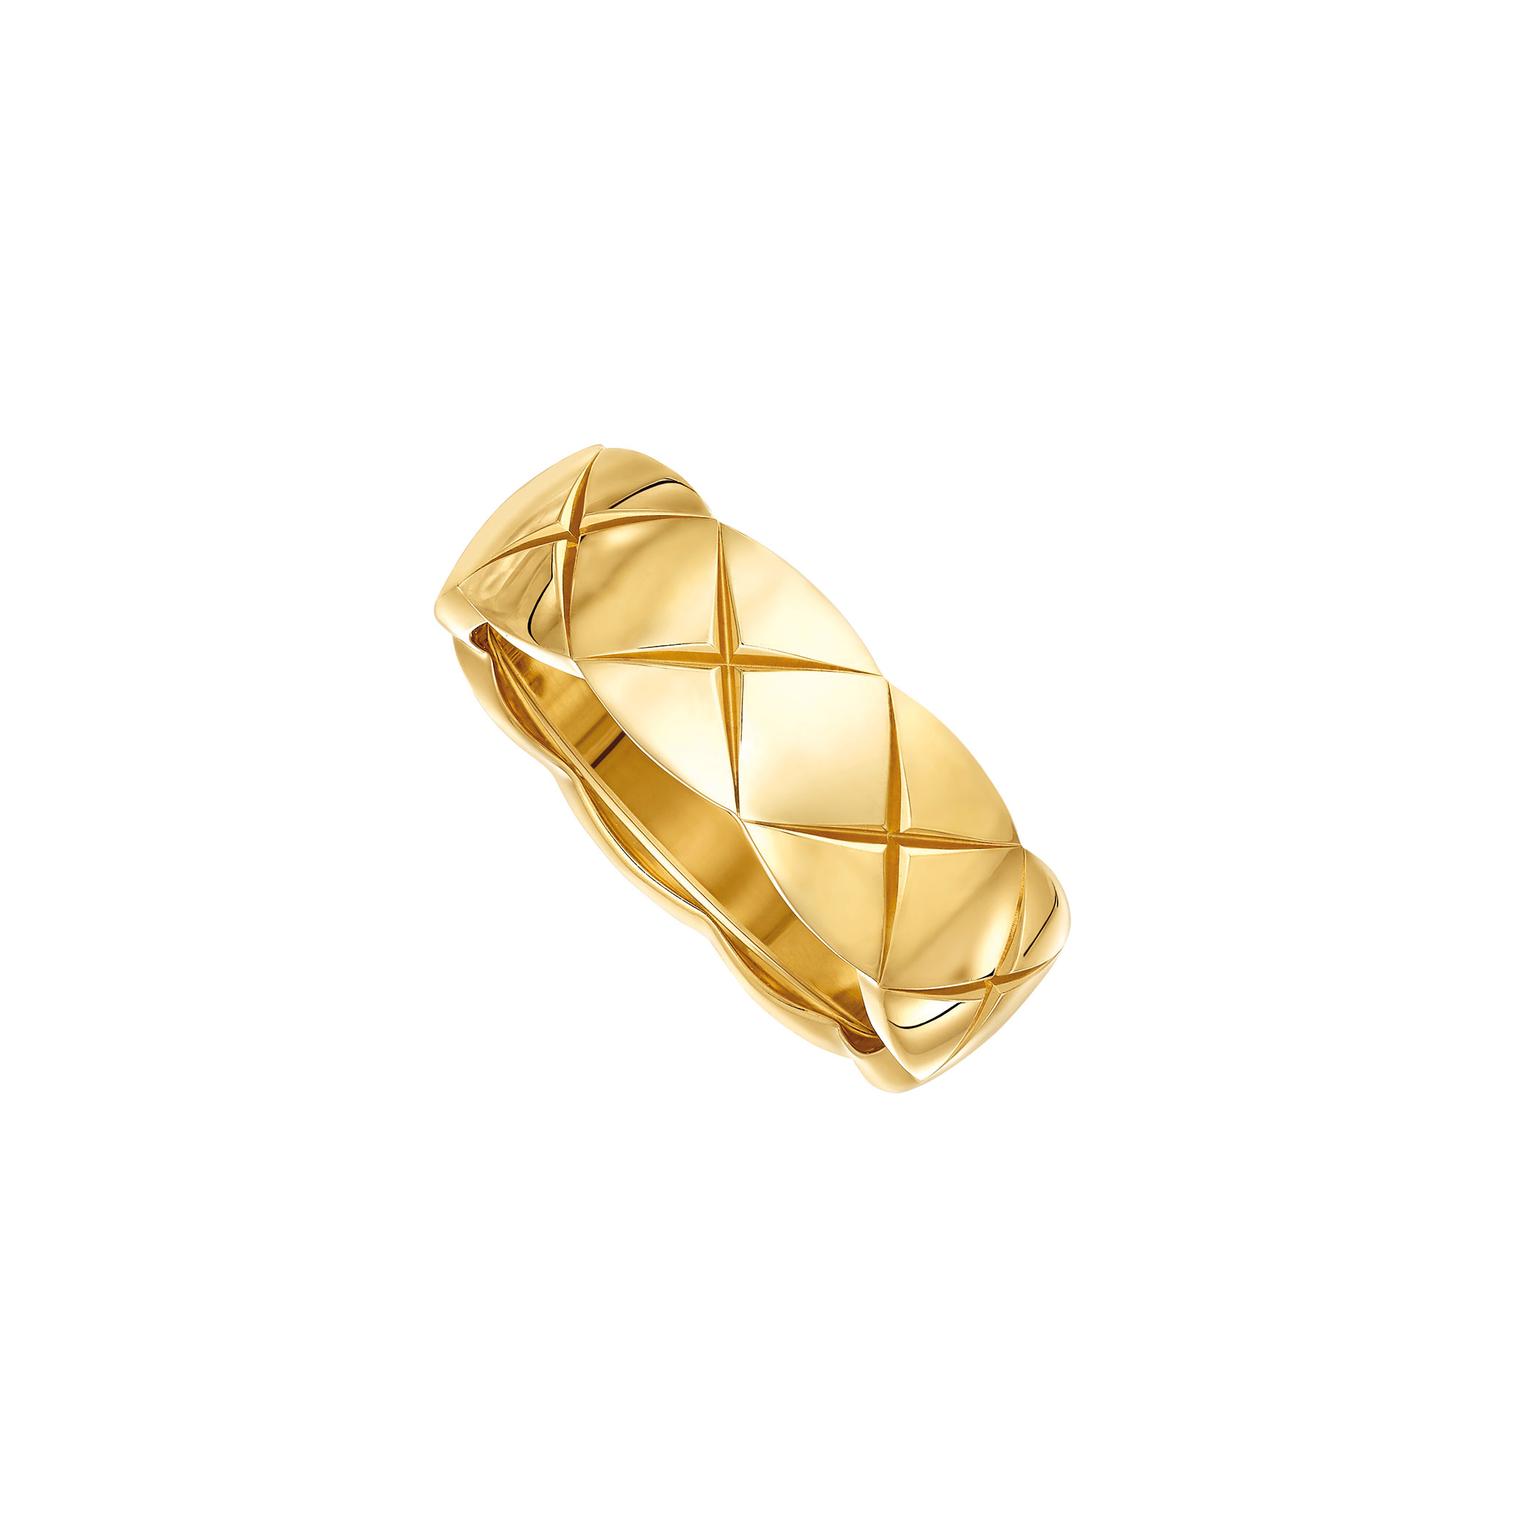 Chanel Coco Crush small 18ct yellow gold ring_zoom